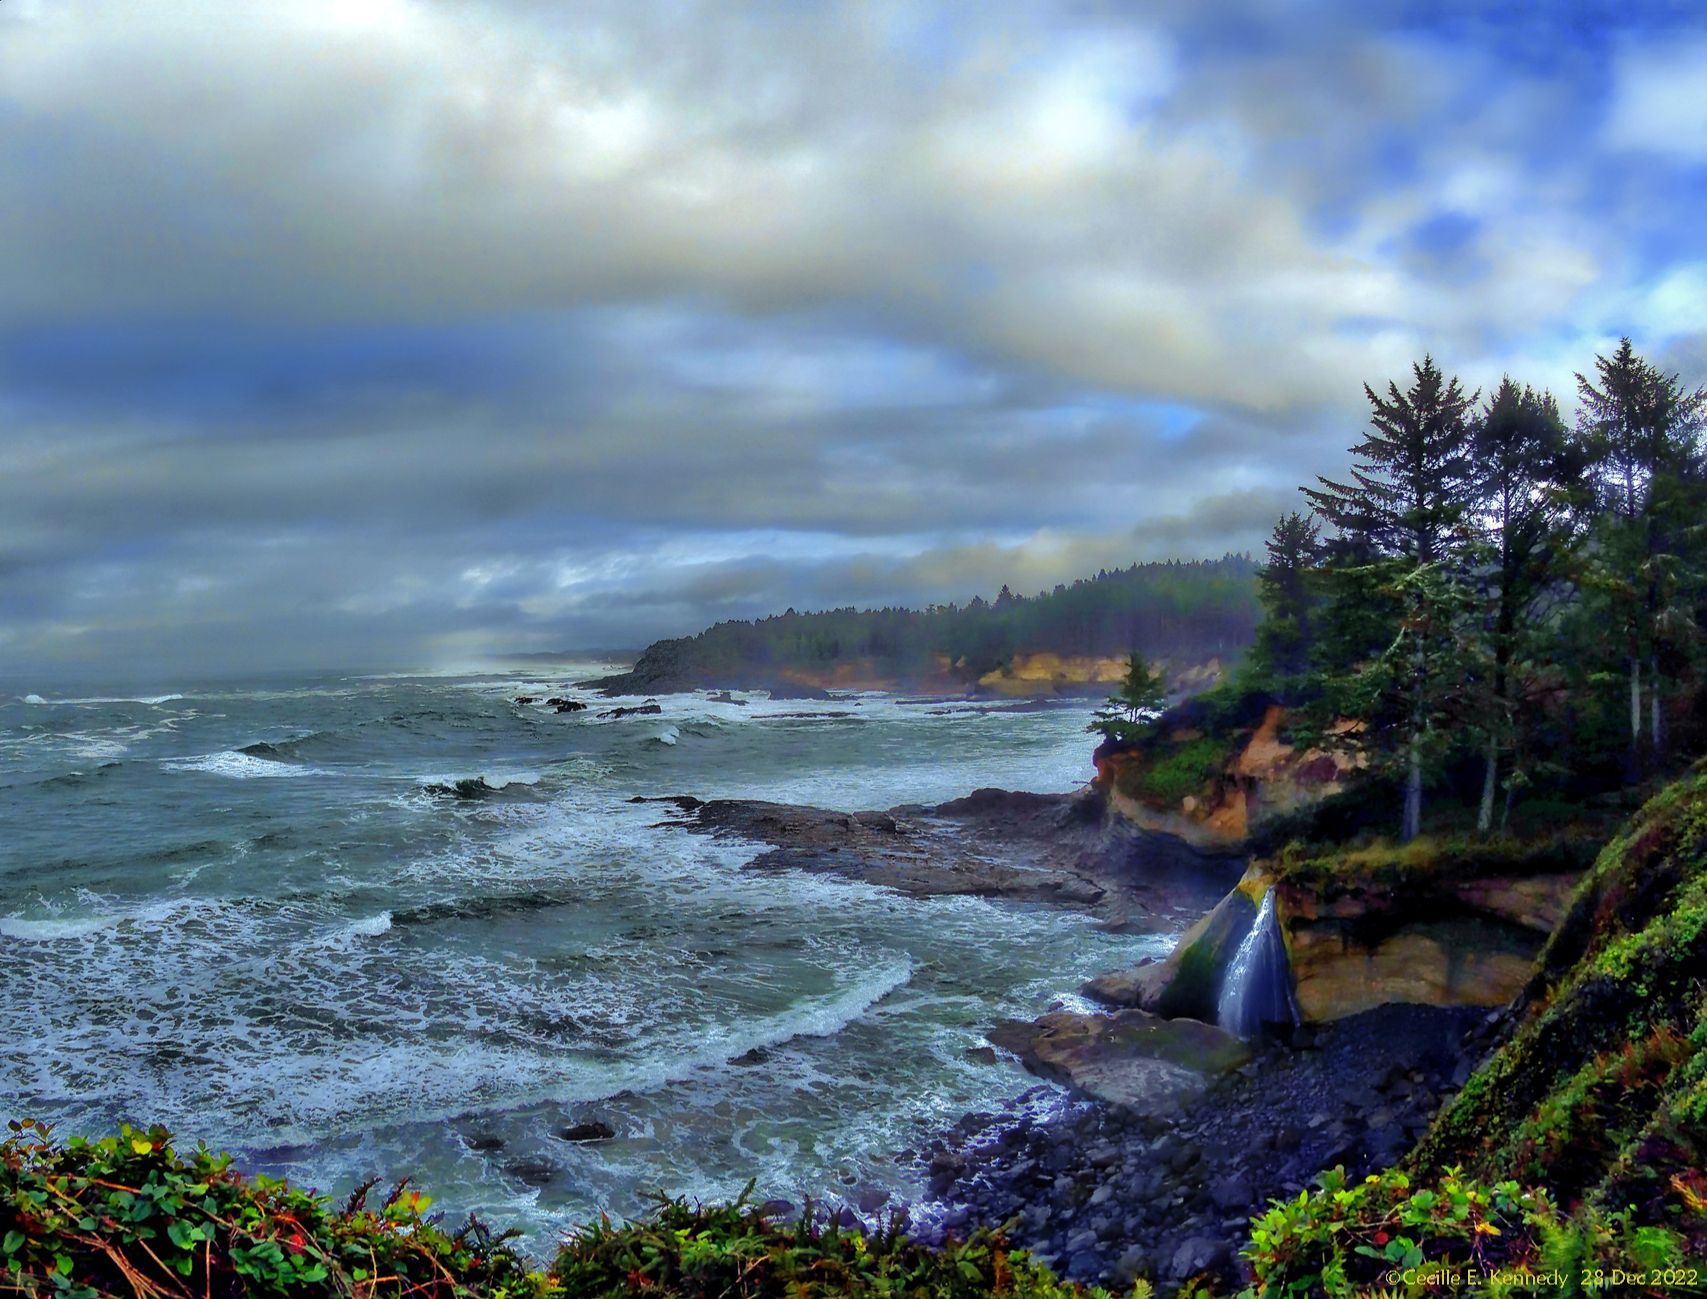 Community photo by Cecille Kennedy | Boiler Bay State Park, Depoe Bay Oregon